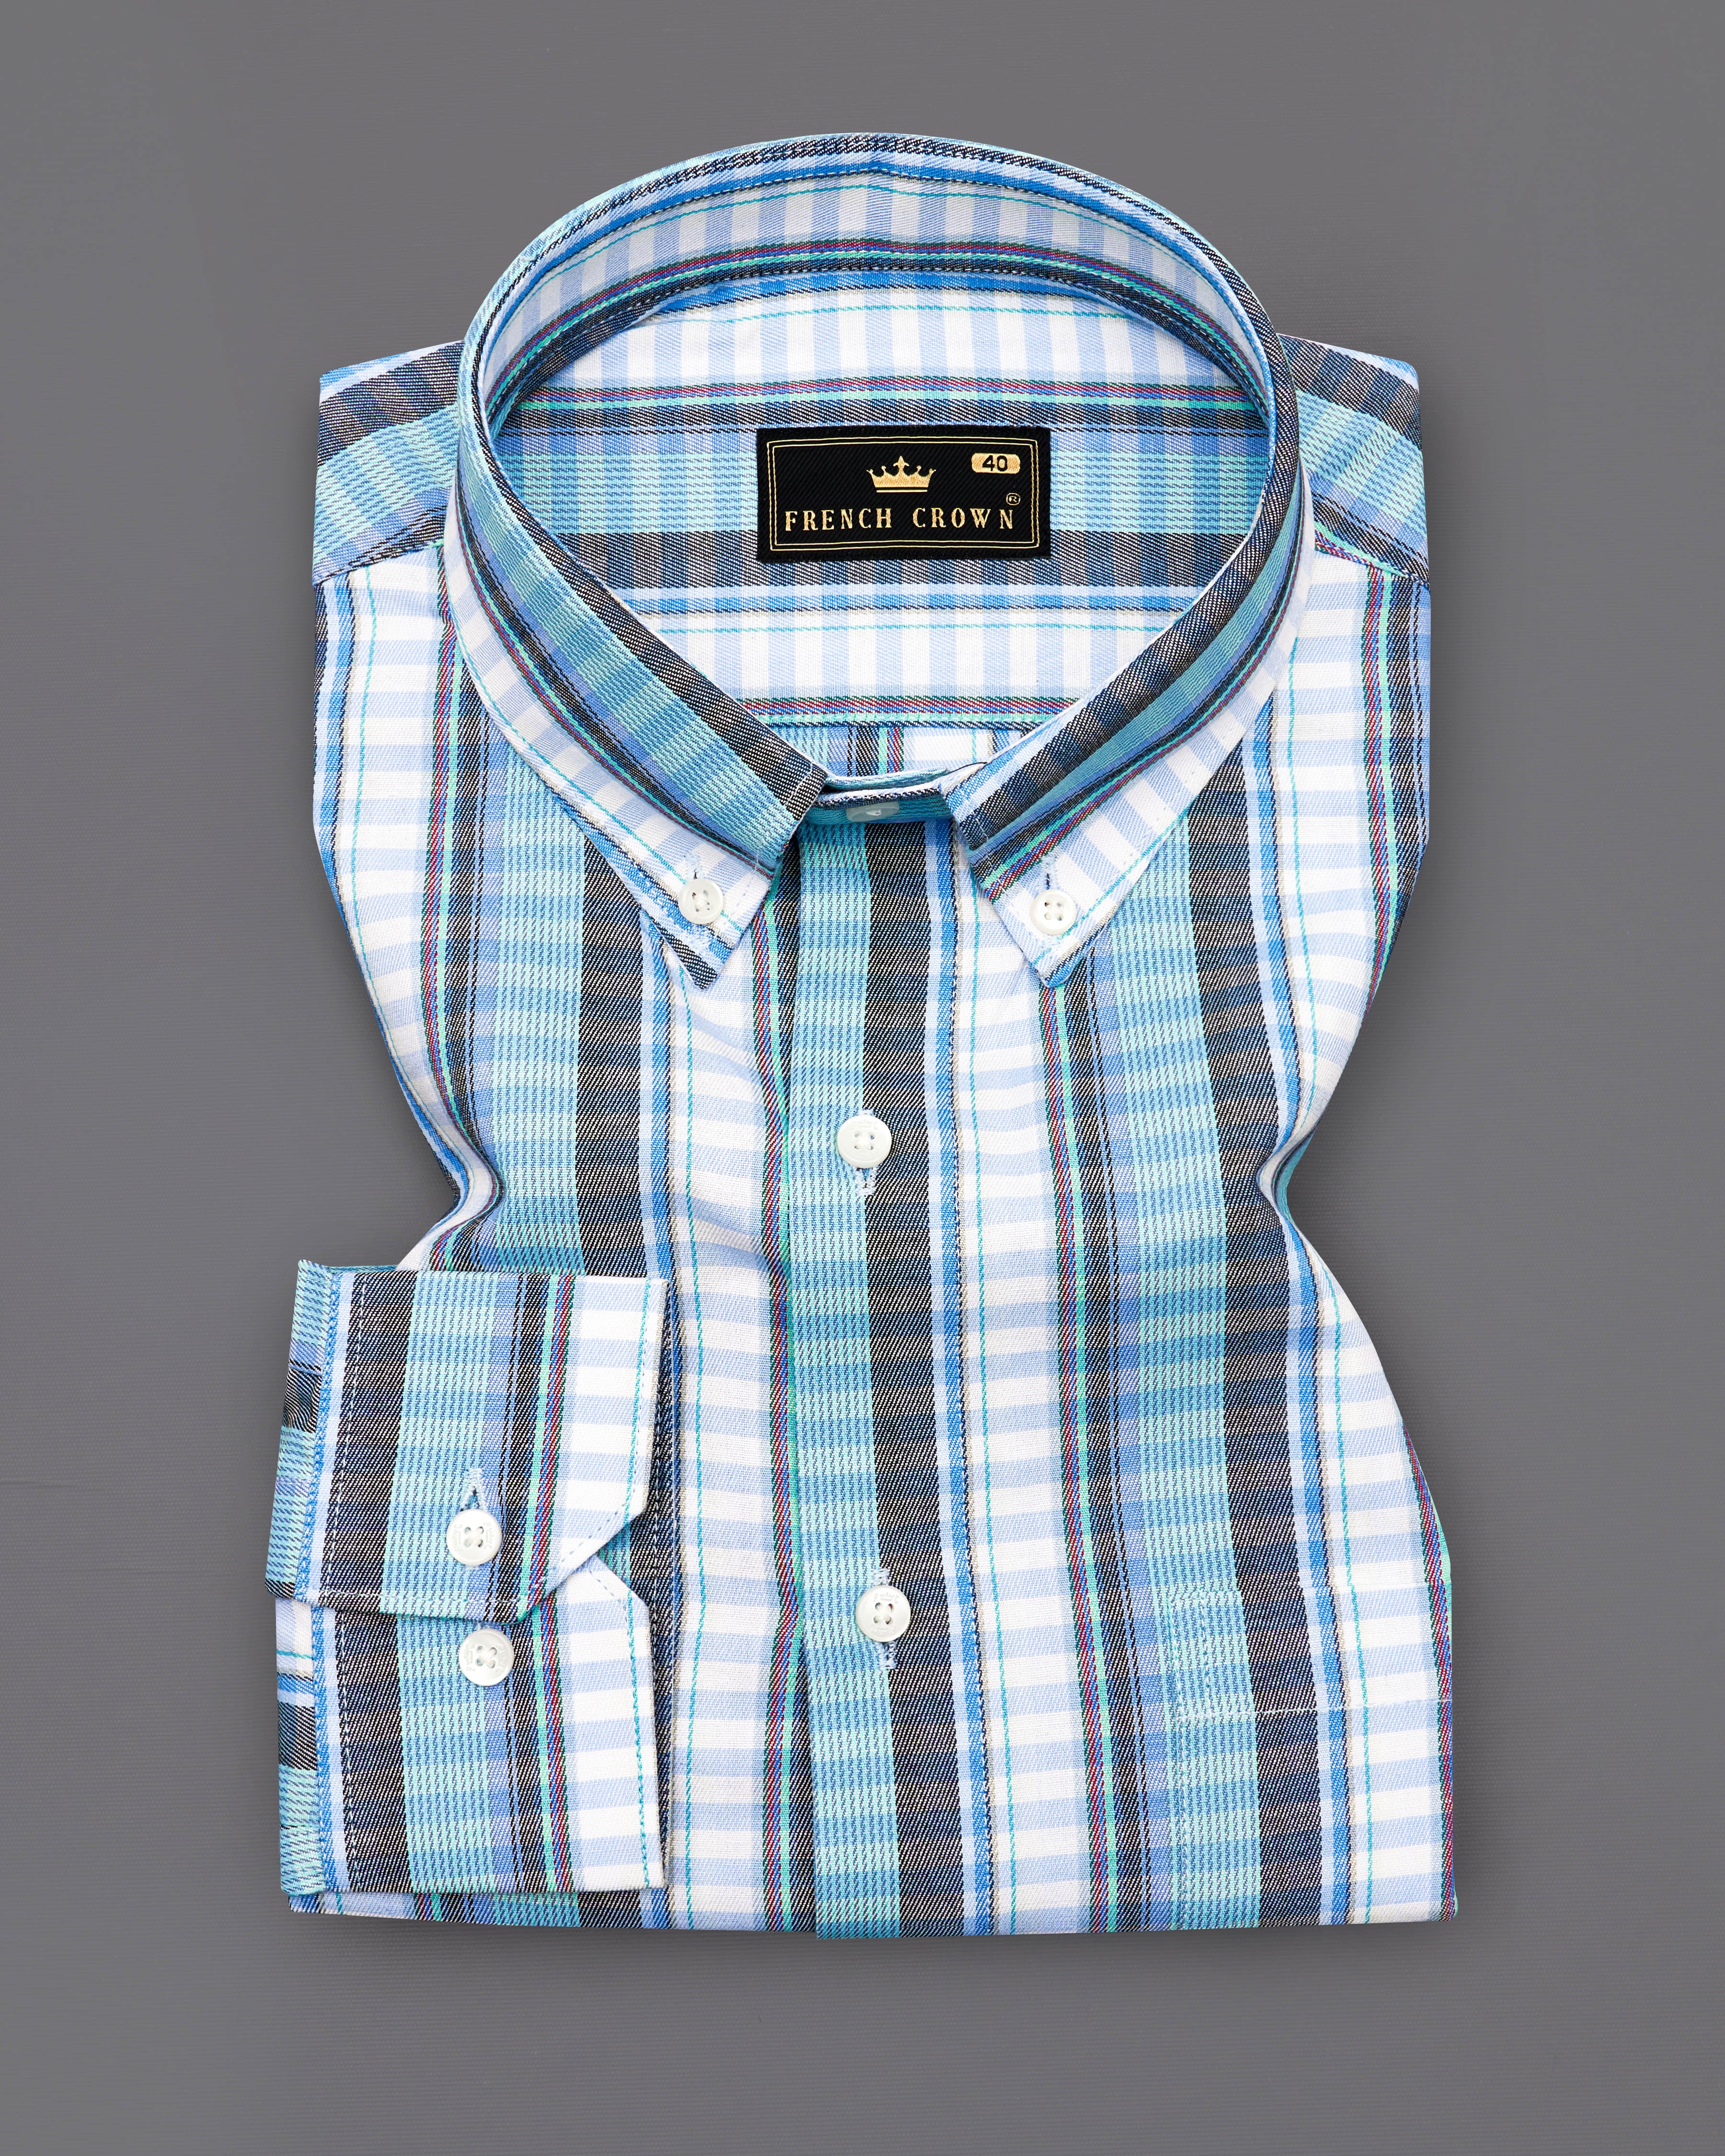 Bright White with Seagull Blue and Shuttle Gray Twill Striped Premium Cotton Shirt 9393-BD-38, 9393-BD-H-38, 9393-BD-39, 9393-BD-H-39, 9393-BD-40, 9393-BD-H-40, 9393-BD-42, 9393-BD-H-42, 9393-BD-44, 9393-BD-H-44, 9393-BD-46, 9393-BD-H-46, 9393-BD-48, 9393-BD-H-48, 9393-BD-50, 9393-BD-H-50, 9393-BD-52, 9393-BD-H-52